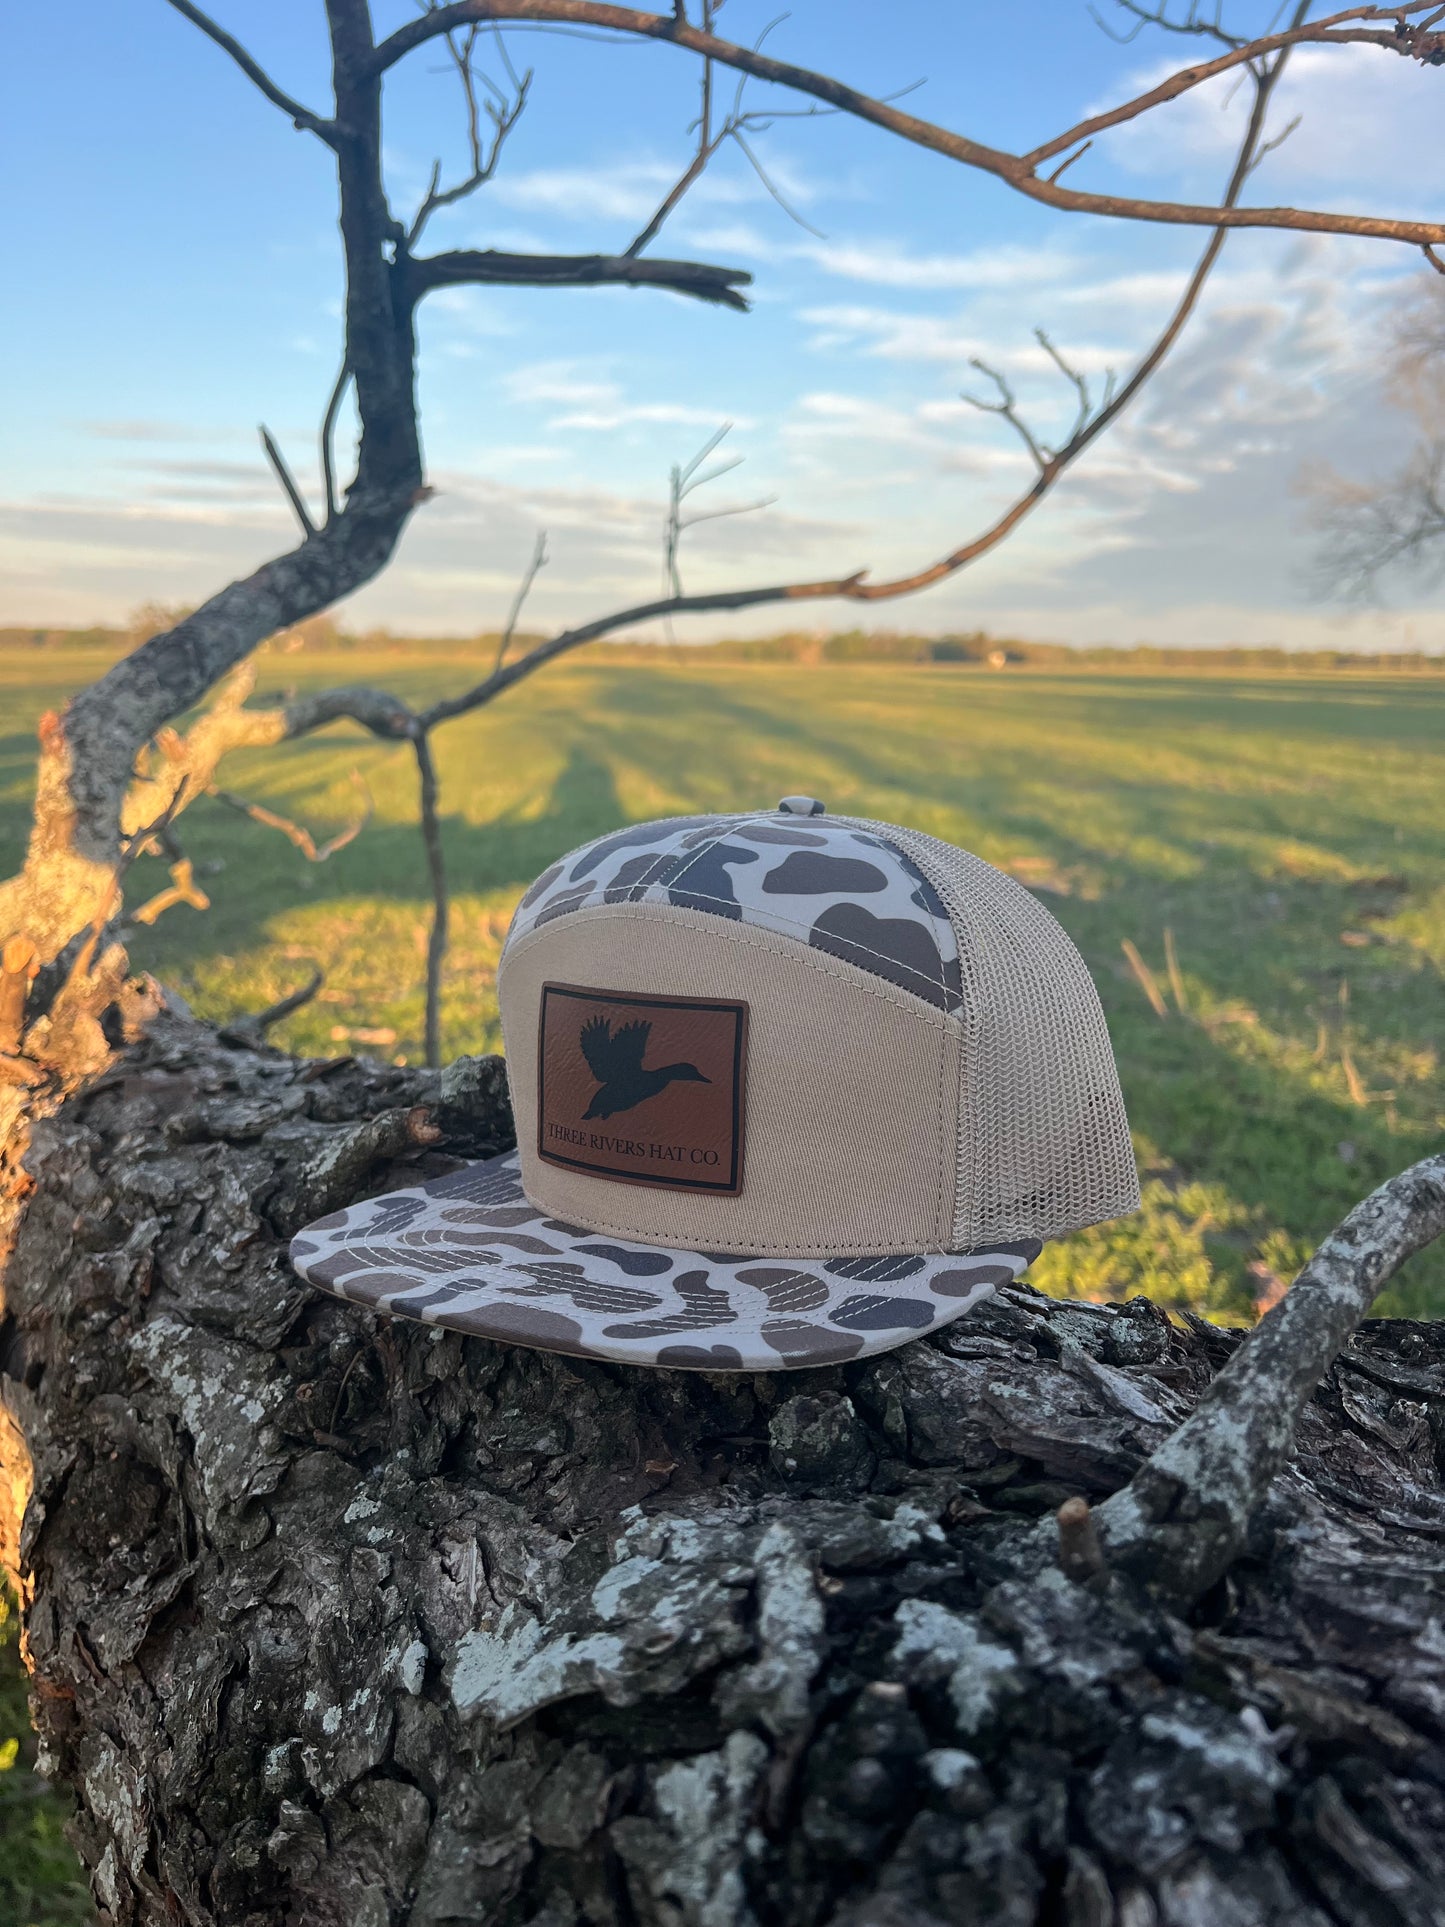 Duck Silhouette - “Old’s Cool” Camo Flatbill Snapback - Lost Hat Co. 7 panel